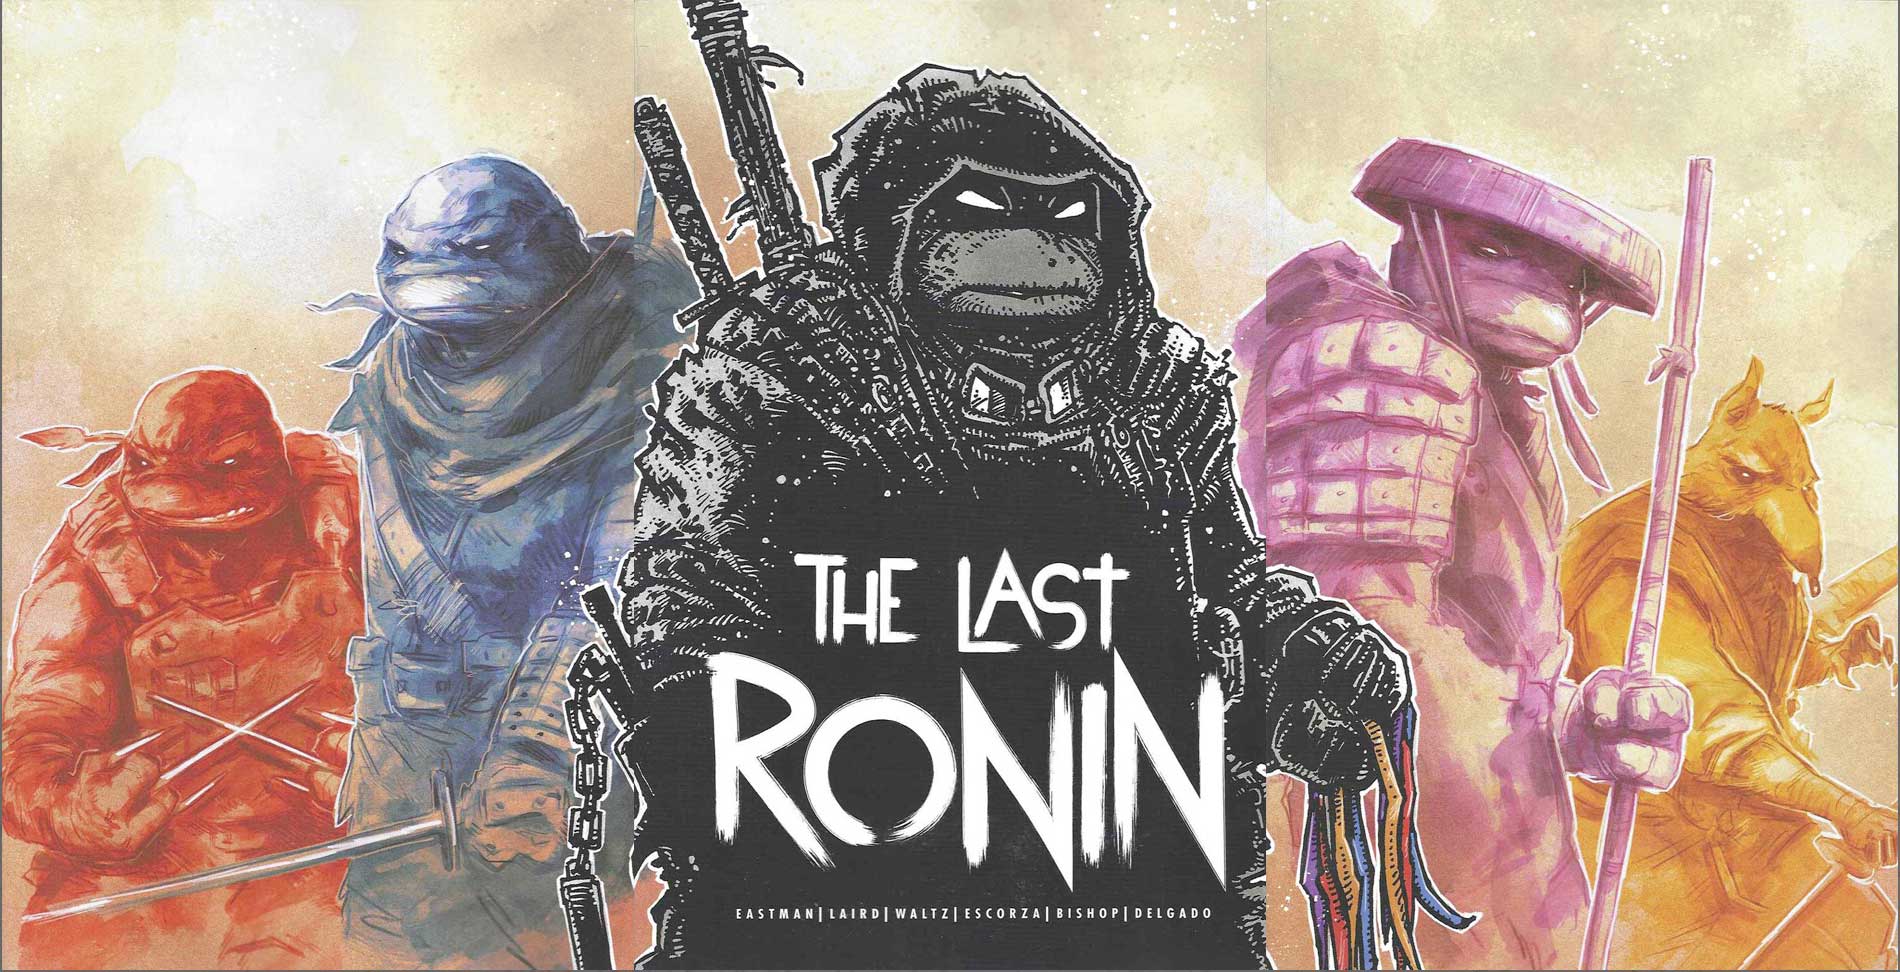 Last Ronin #1 SDCC Special Edition Interconnecting set with collectible button